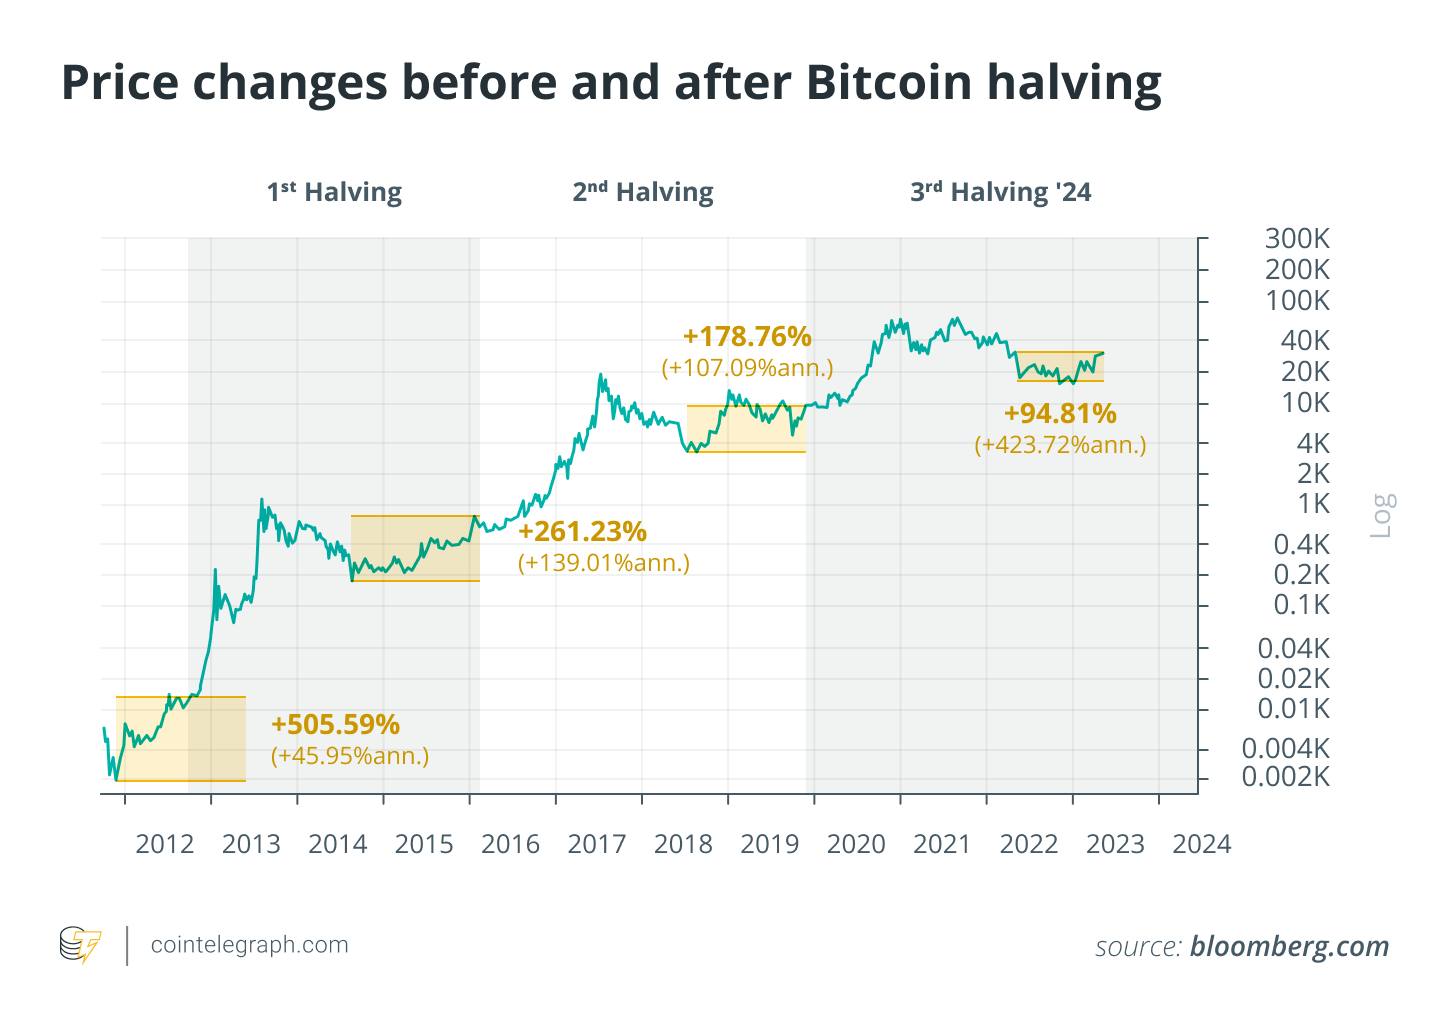 Price changes before and after Bitcoin halving